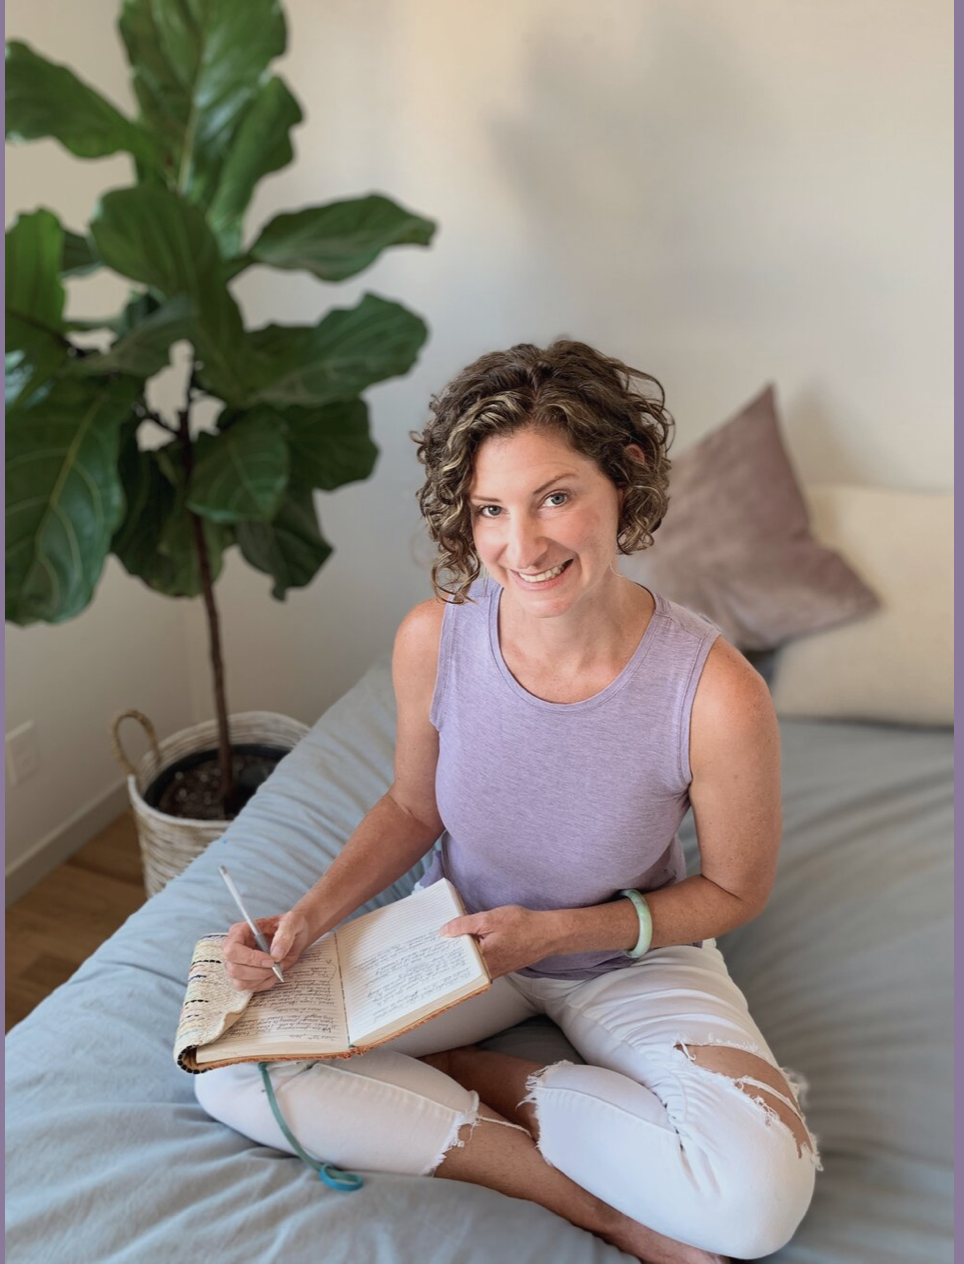 Somatic Awareness and Listening to Your Body (with guest Cera Meintzer)